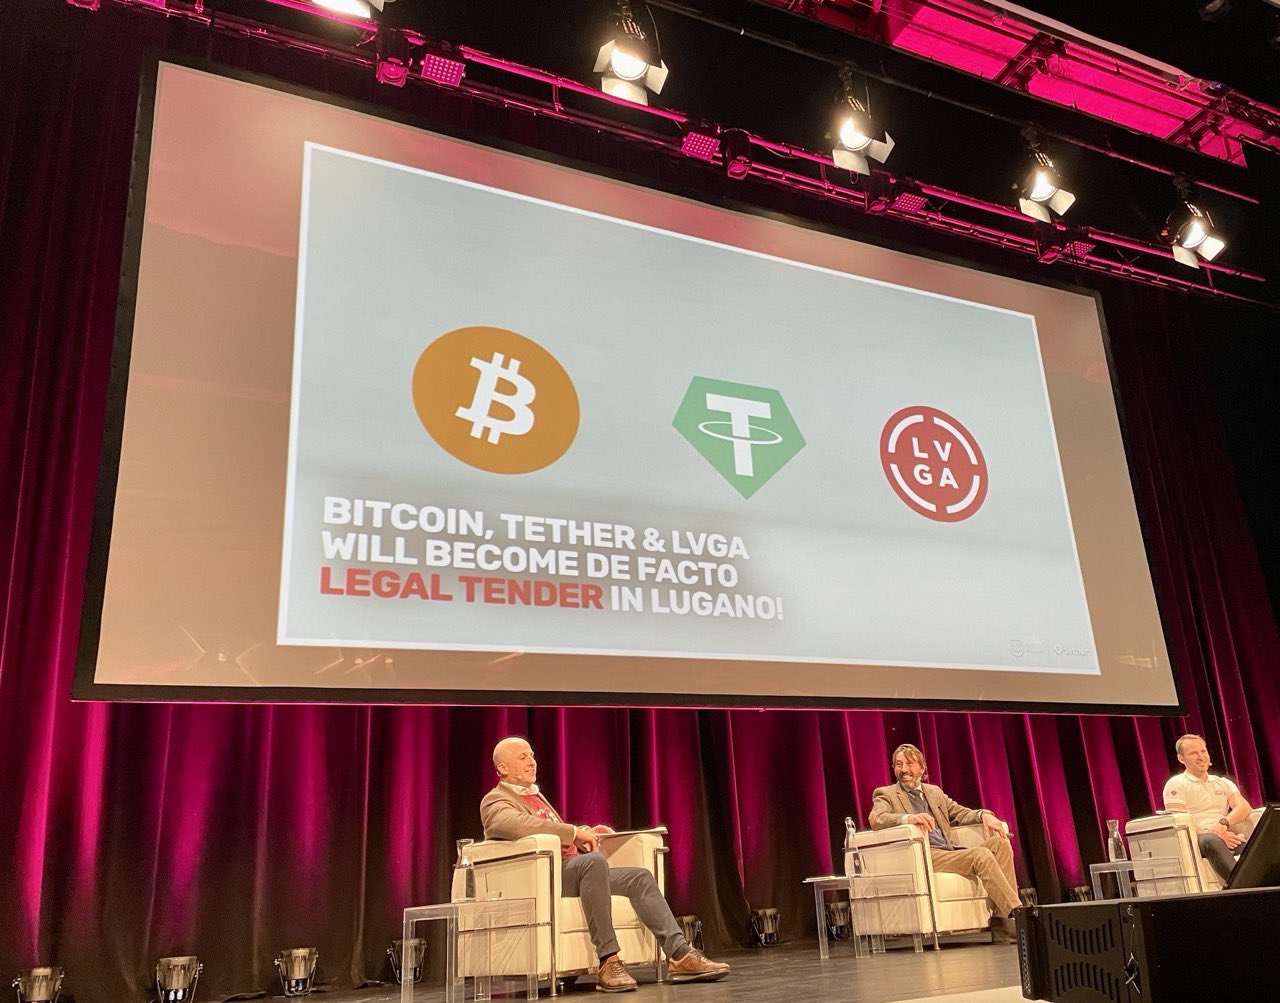 The Swiss city of Lugano recognizes Bitcoin (BTC) and Tether (USDT) as  currency. – CoinLive